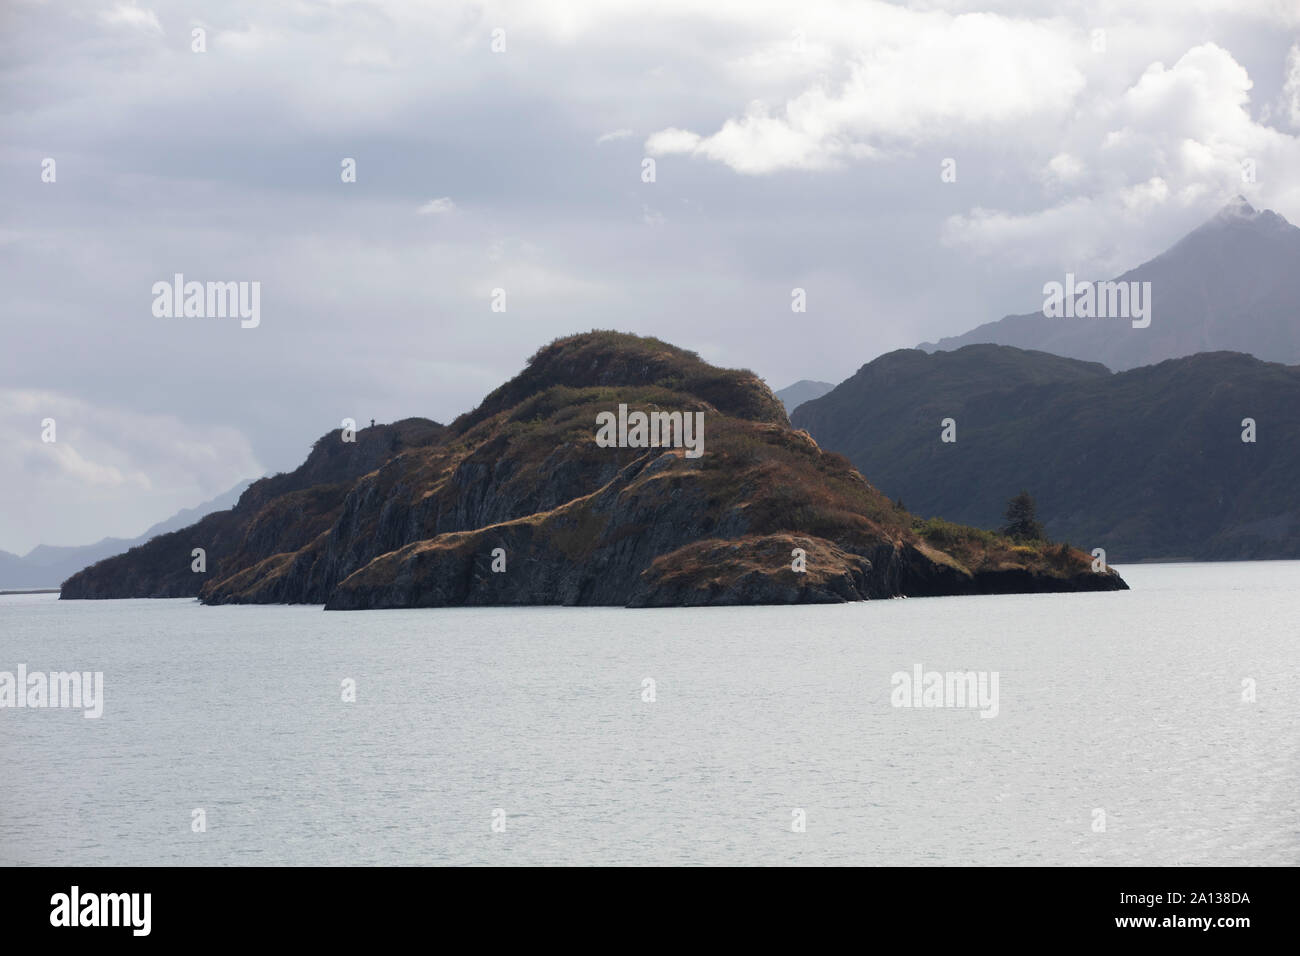 A big Rock/ Island in the middle of a lake, Kingcome Inlet Stock Photo